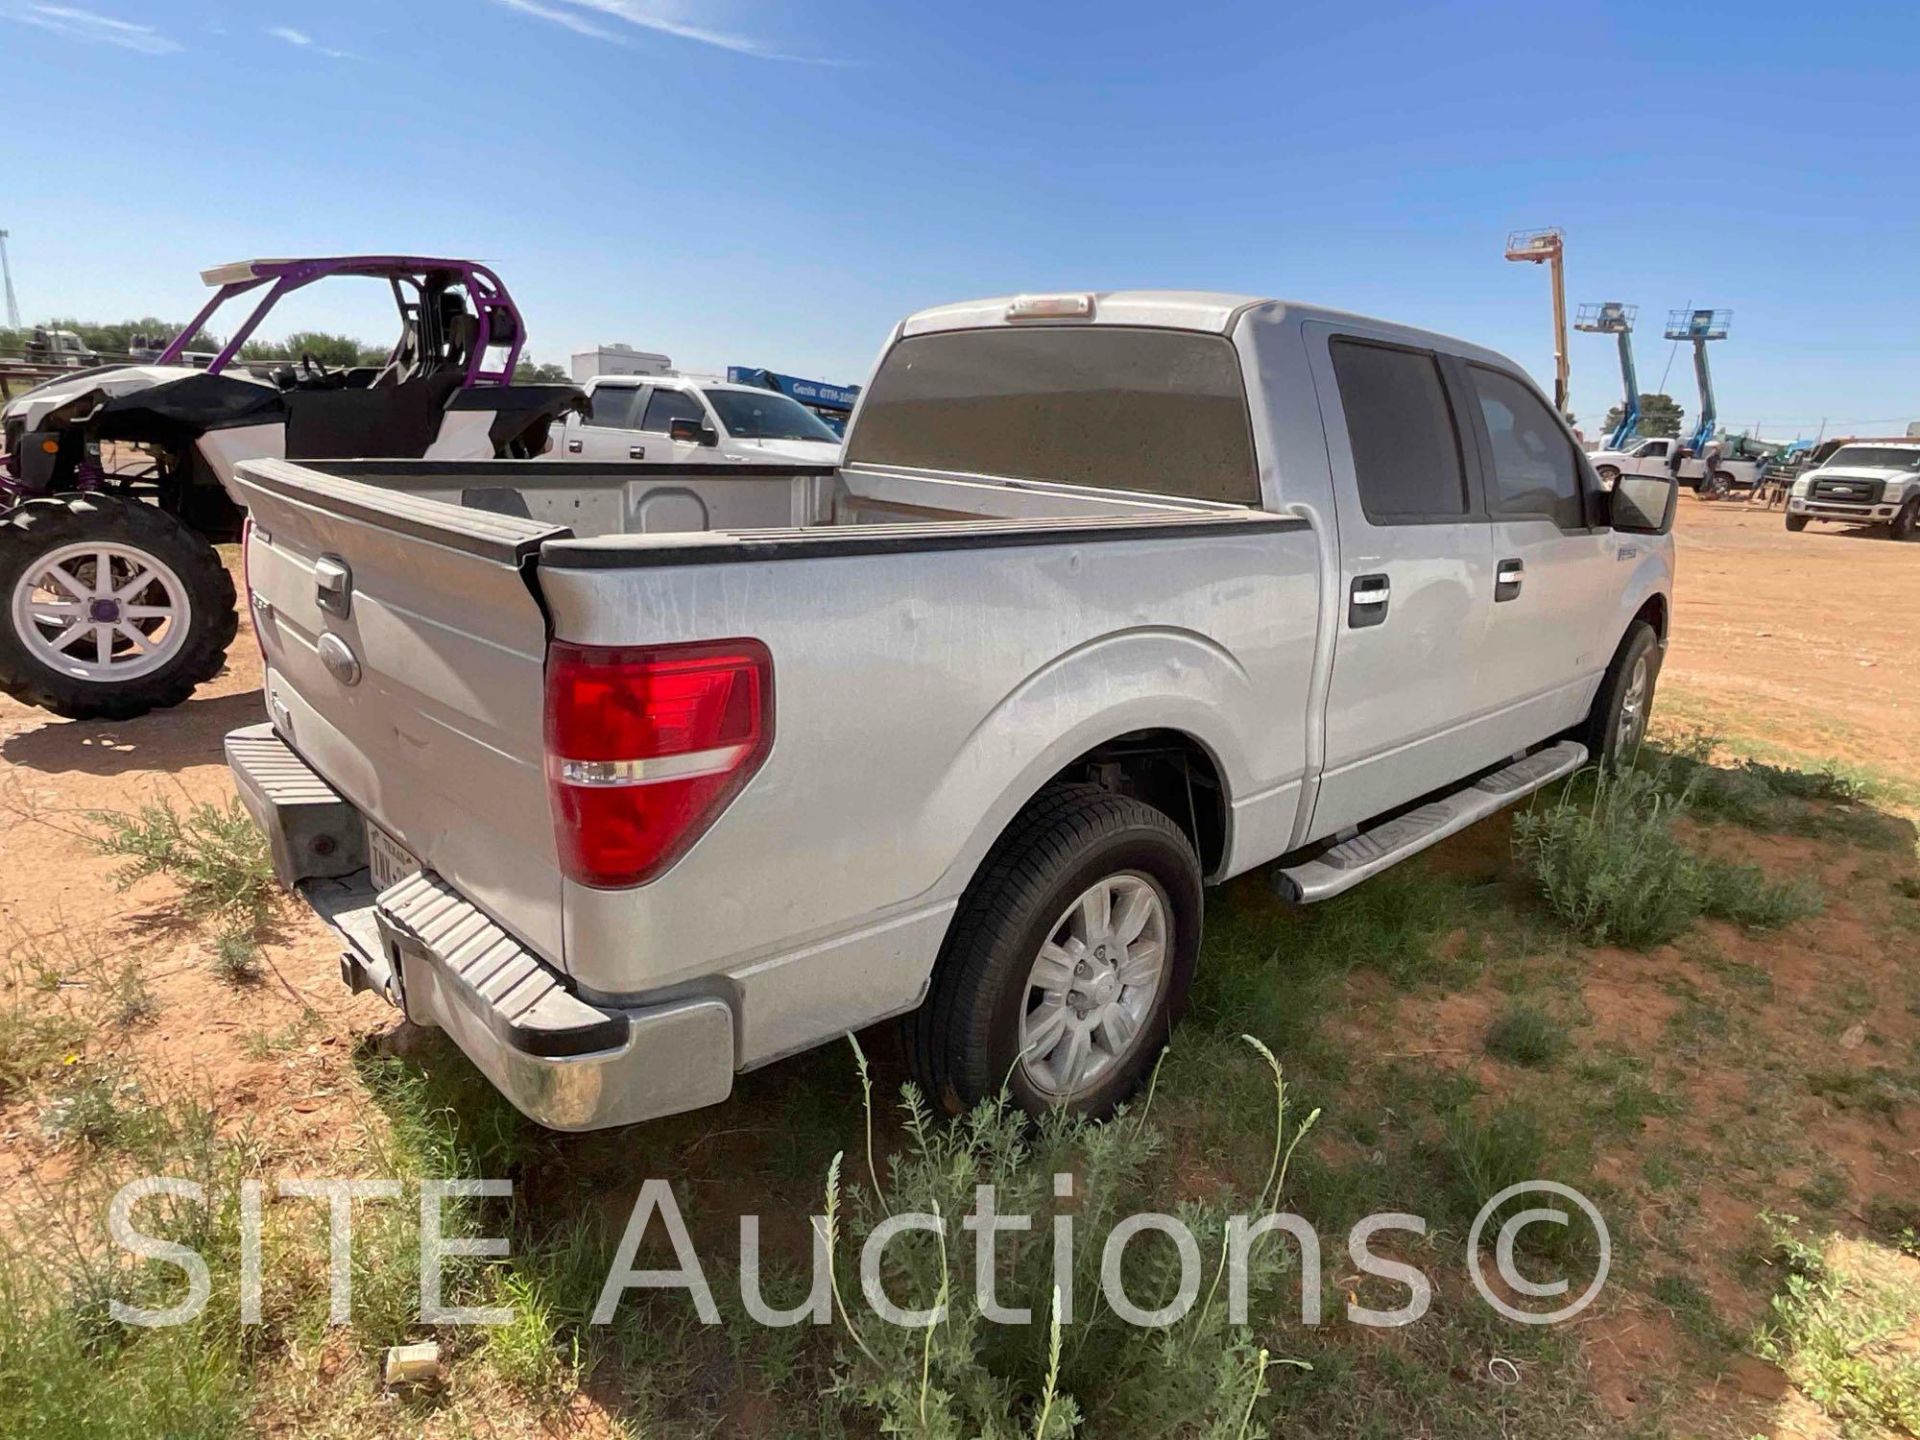 2012 Ford F150 Crew Cab Pickup Truck - Image 4 of 18